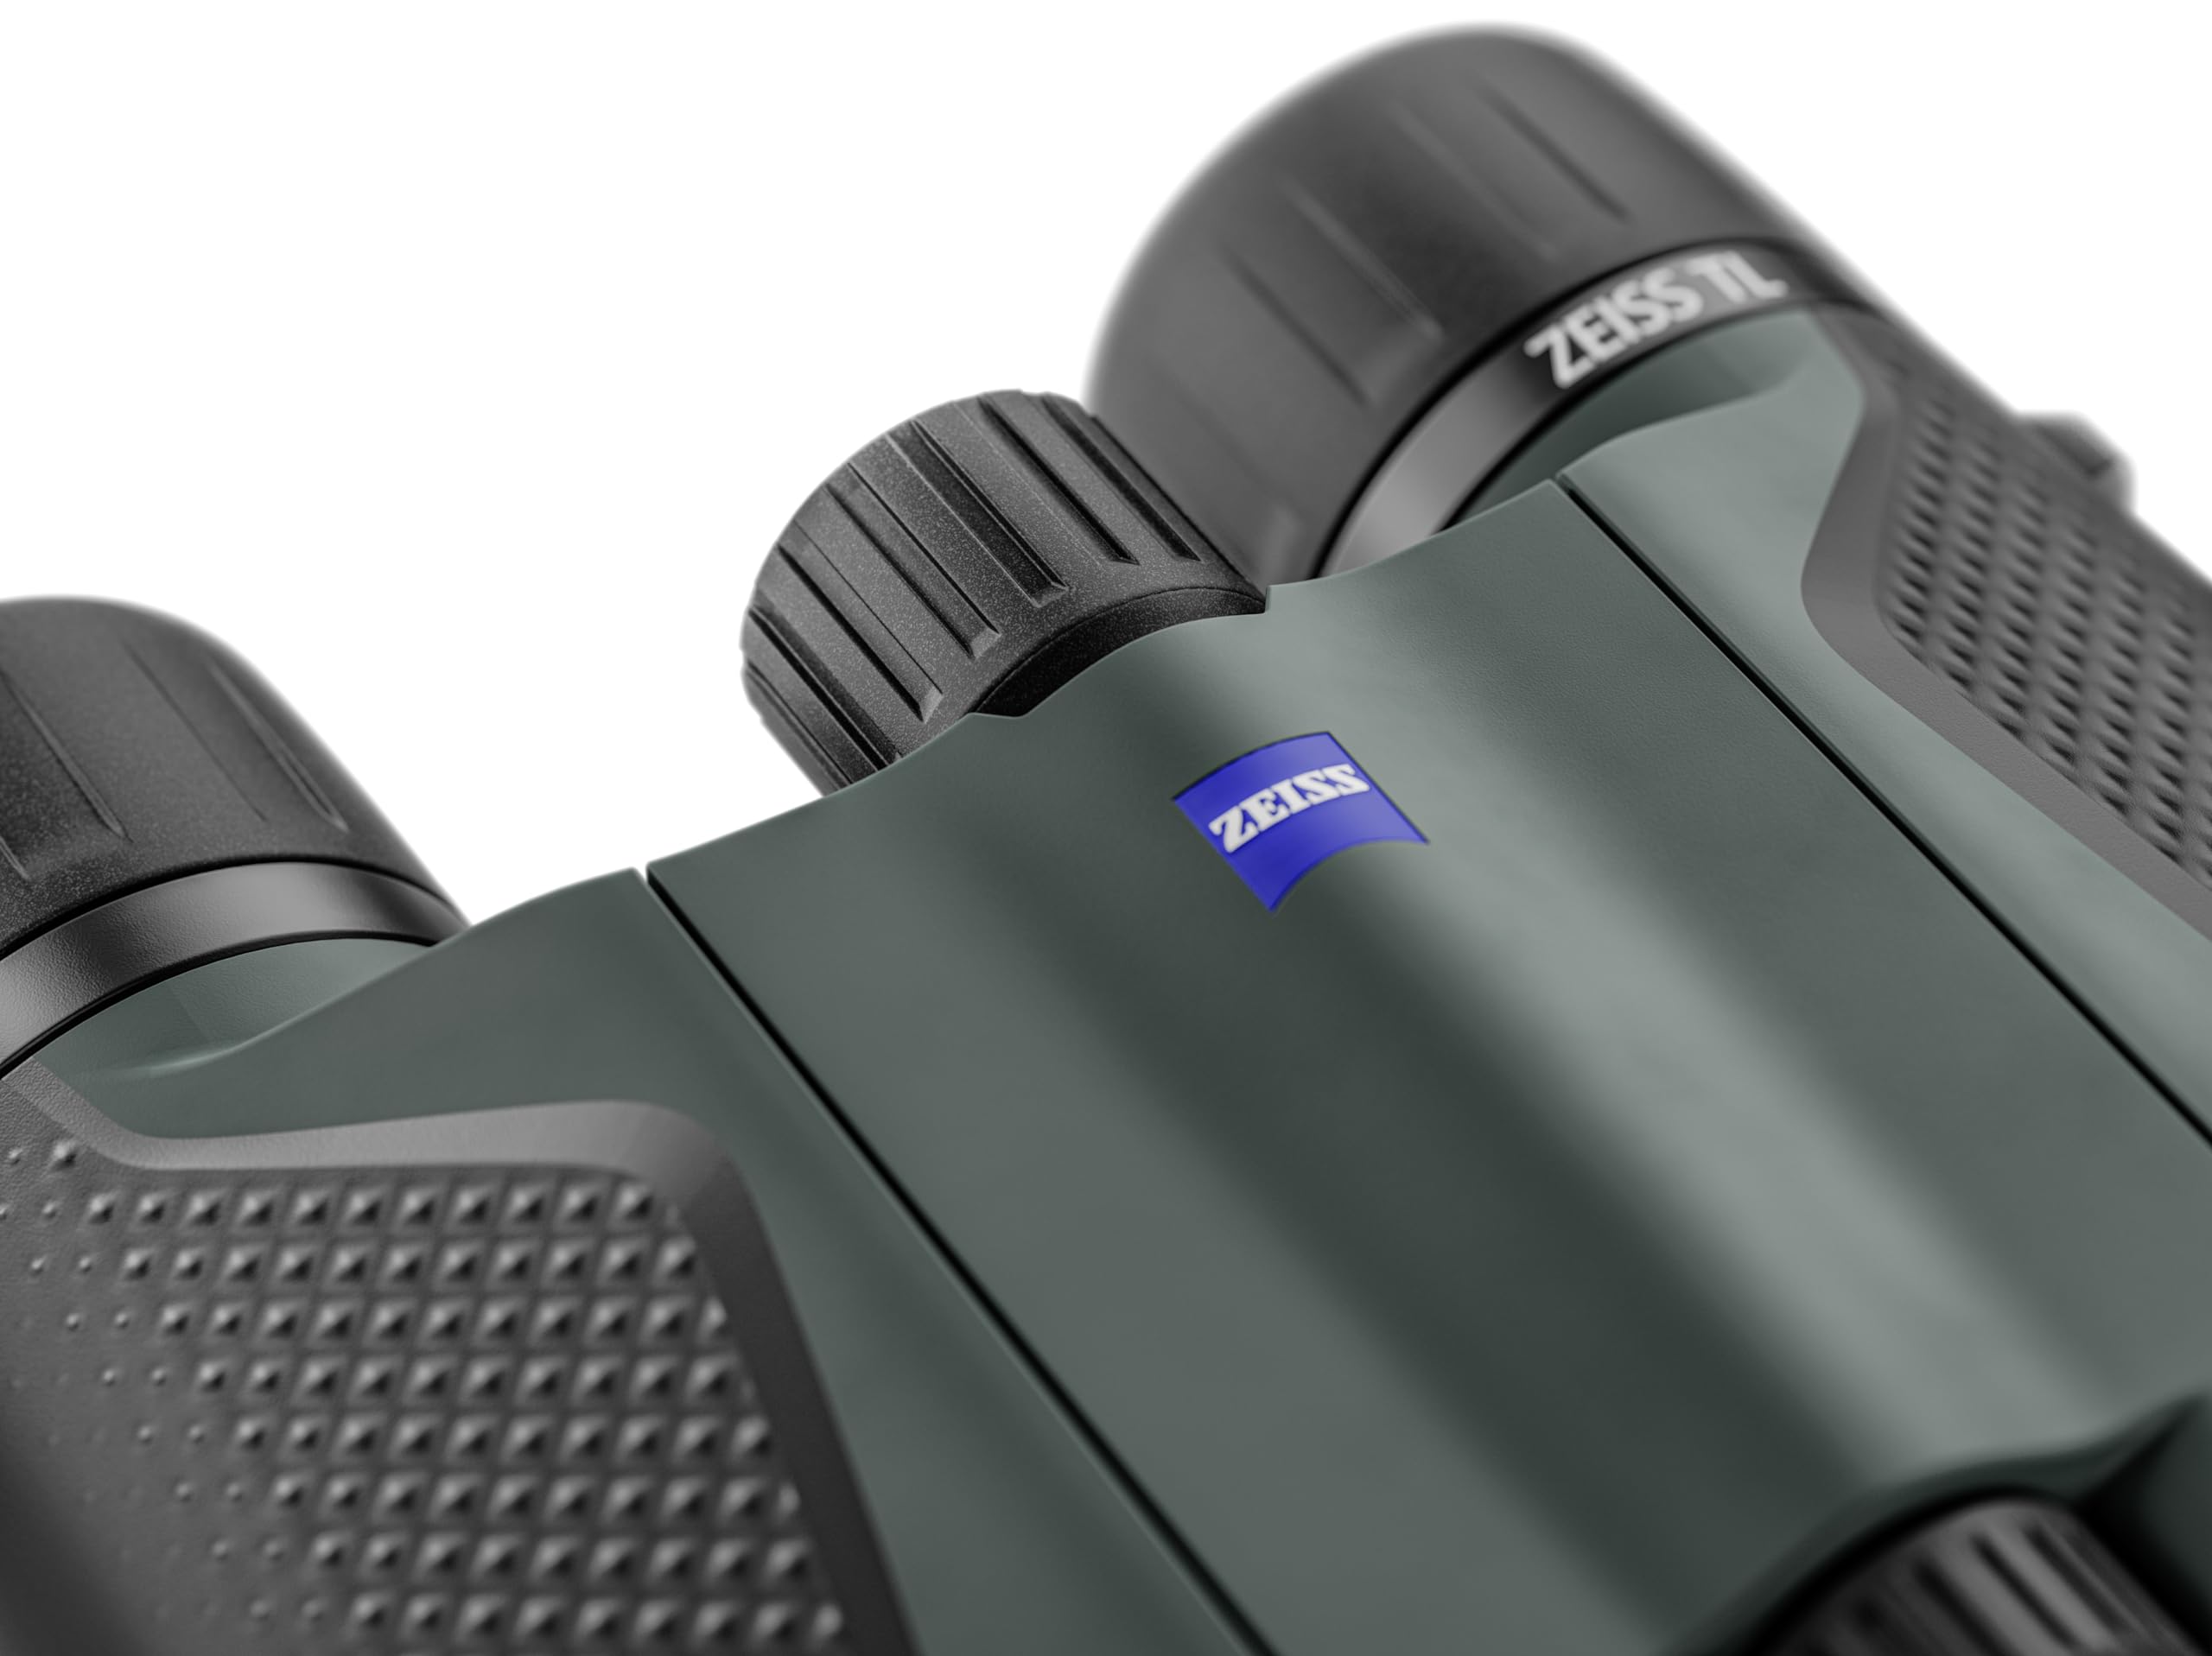 ZEISS Terra TL Pocket Binoculars 10x25 Compact, Waterproof, and Fast Focusing with Coated Glass for Optimal Clarity in All Weather Conditions for Bird Watching, Hunting, Sightseeing, Dark Green